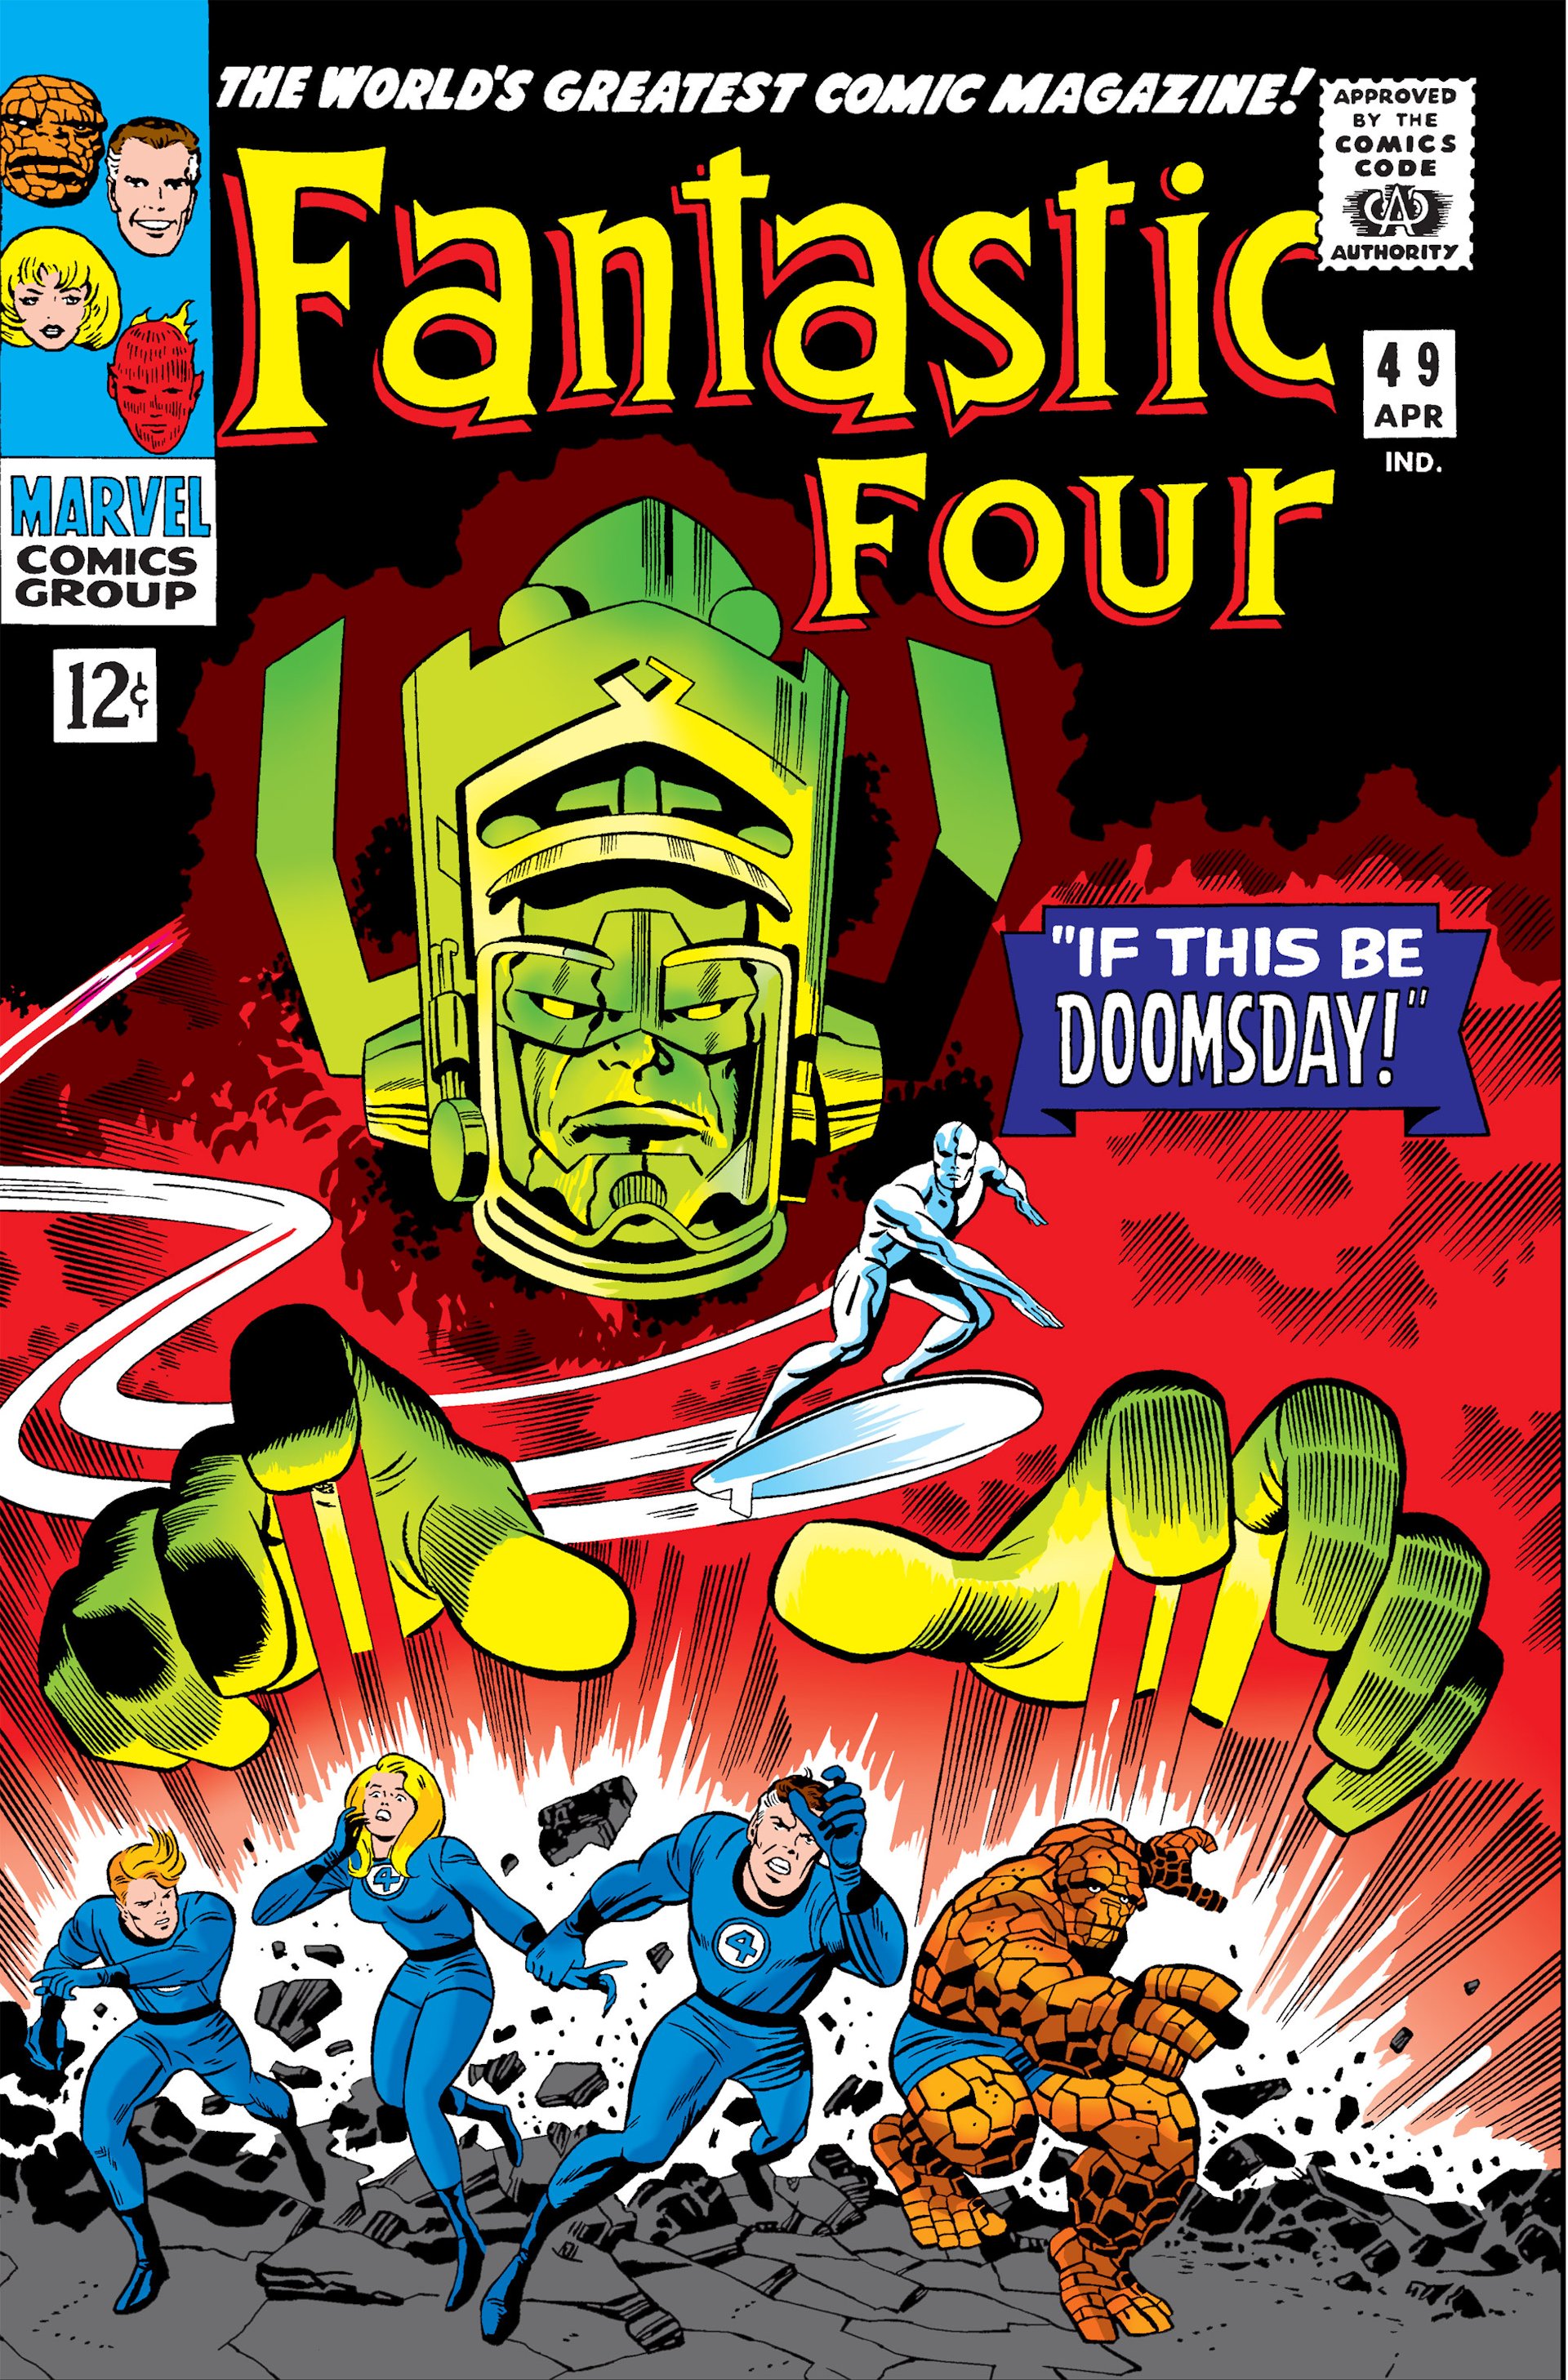 Read online Fantastic Four (1961) comic -  Issue #49 - 1